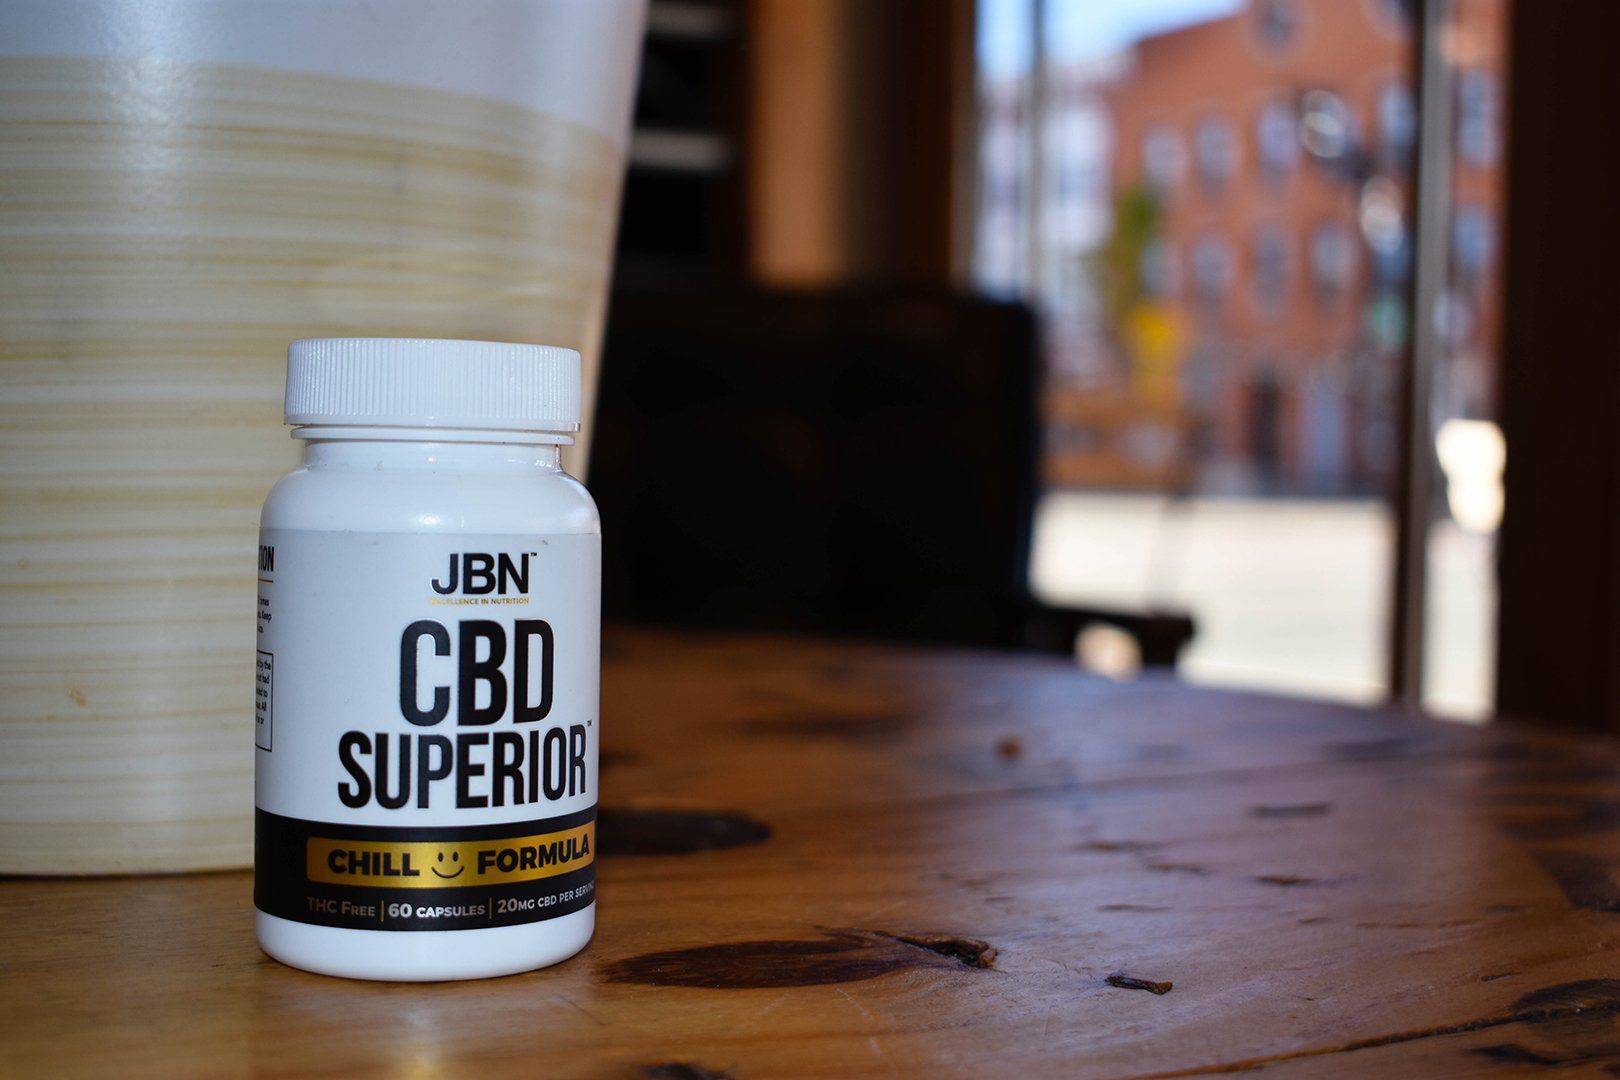 JBN's CBD supplement product on a wood table with a blurred background